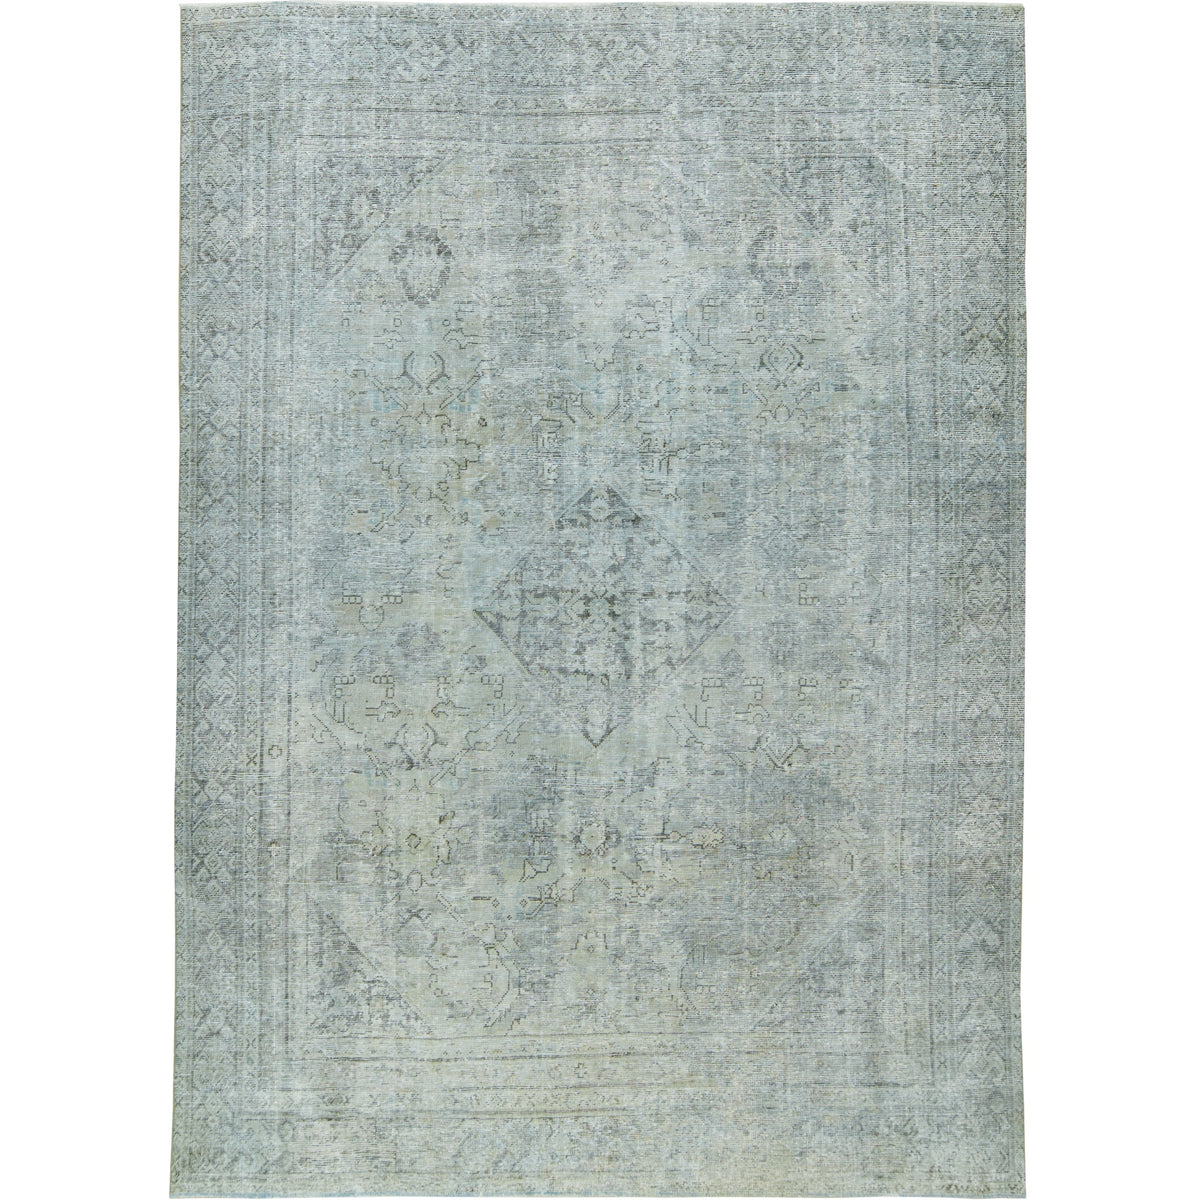 Pritha - Vintage Turkish Rug, Enchanting Your Floors with Timeless Beauty | Kuden Rugs